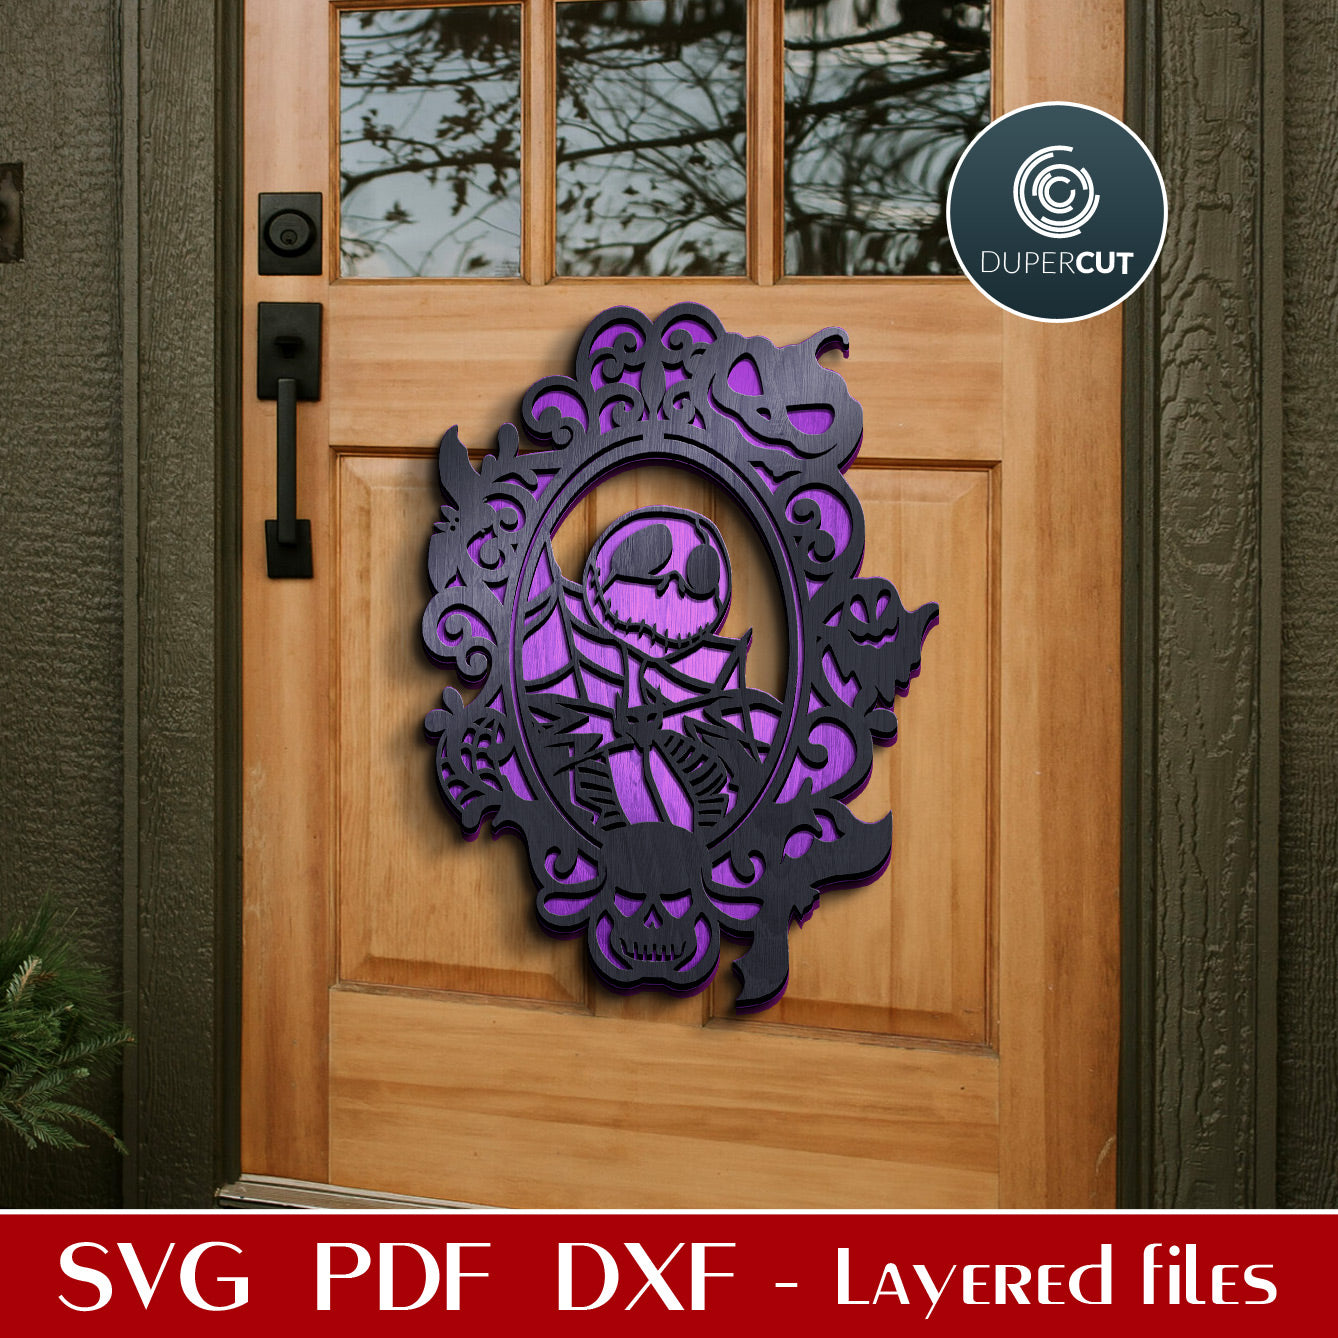 Nightmare before Christmas Jack Skellington Halloween door hanger - SVG PDF DXF layered cutting files for Glowforge, Silhouette cameo, Cricut, CNC plasma laser machines by DuperCut